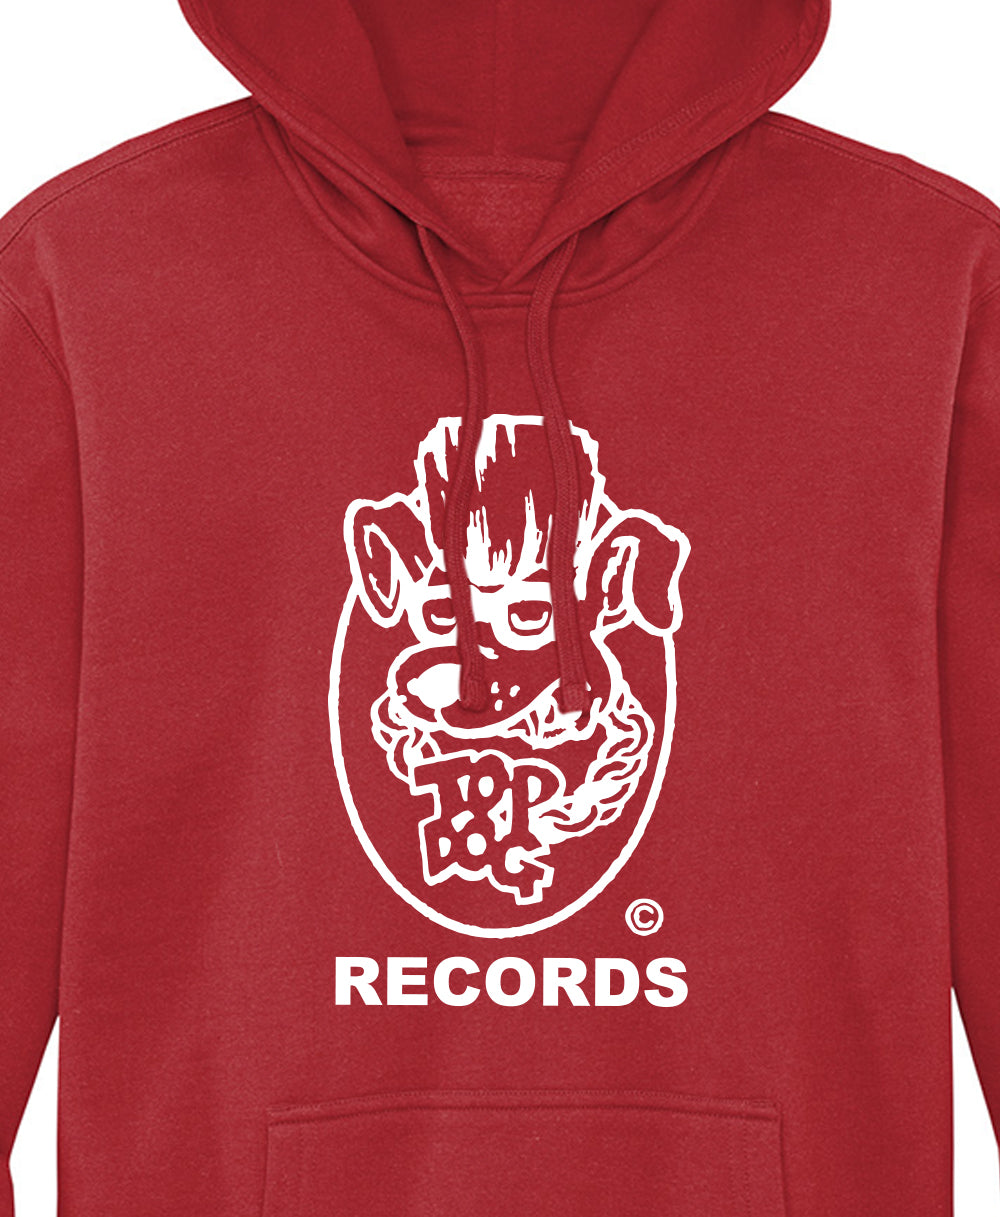 Top Dog Records Pullover